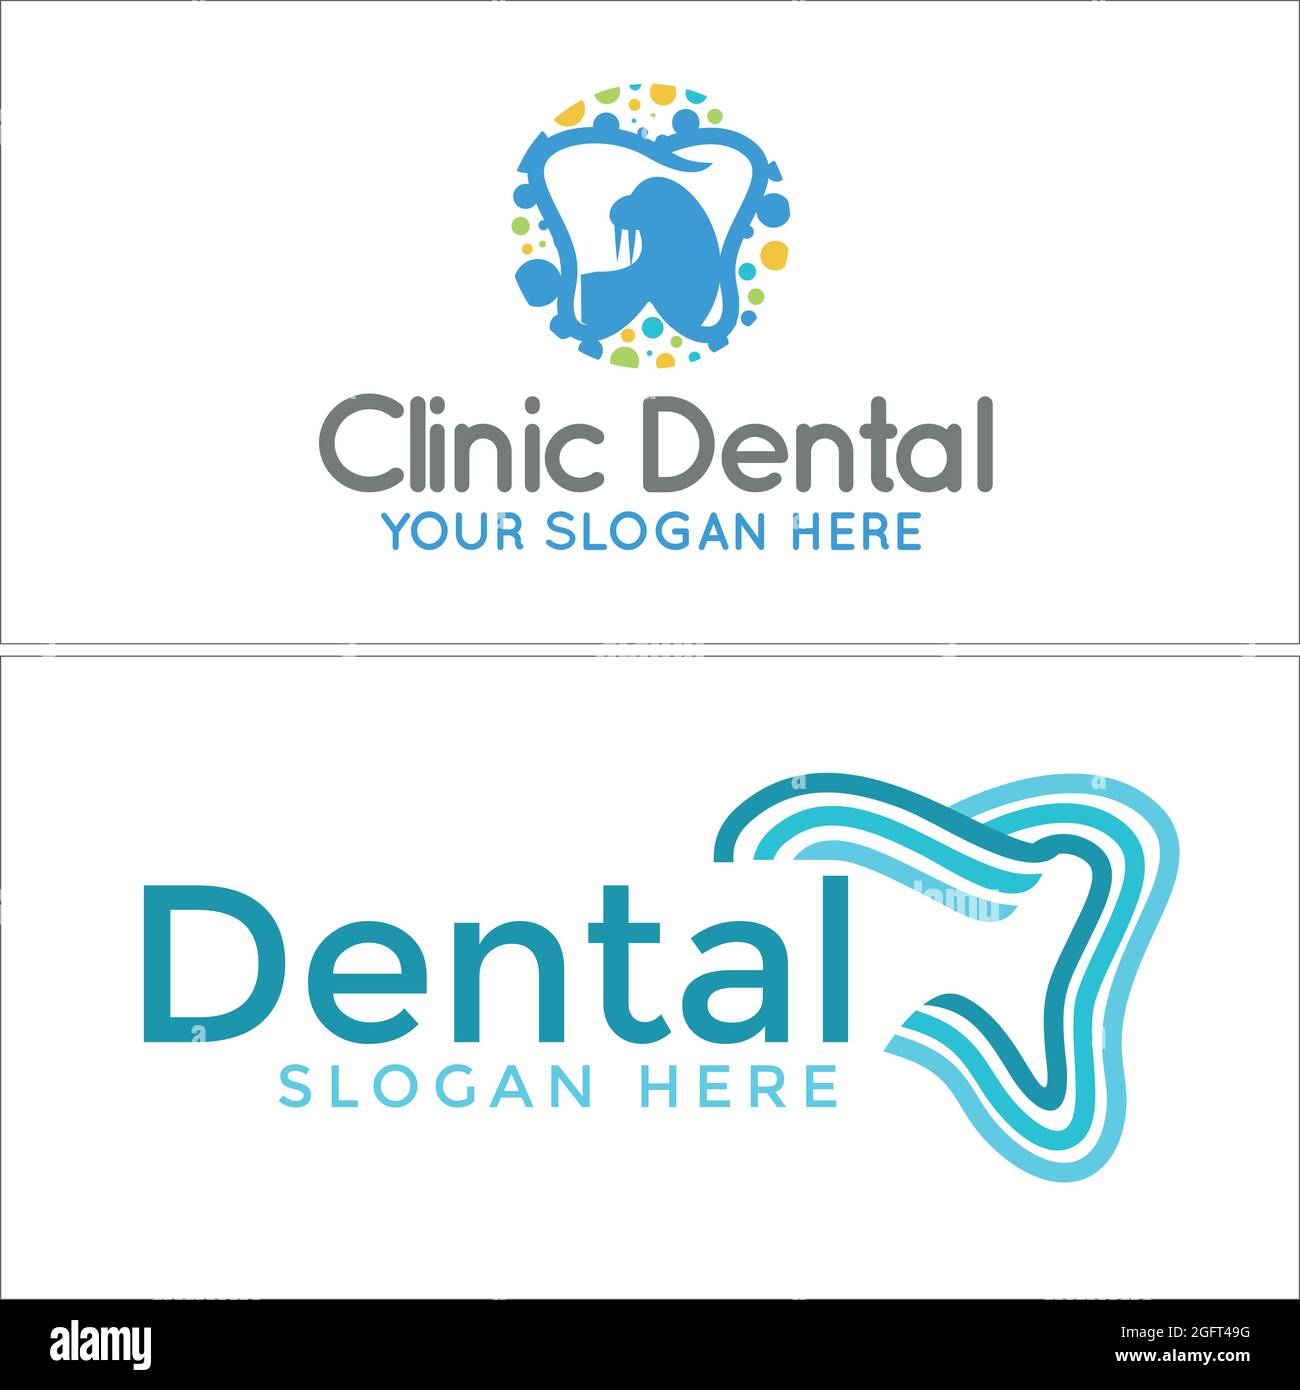 Dental clinic with tooth and walrus logo design Stock Vector